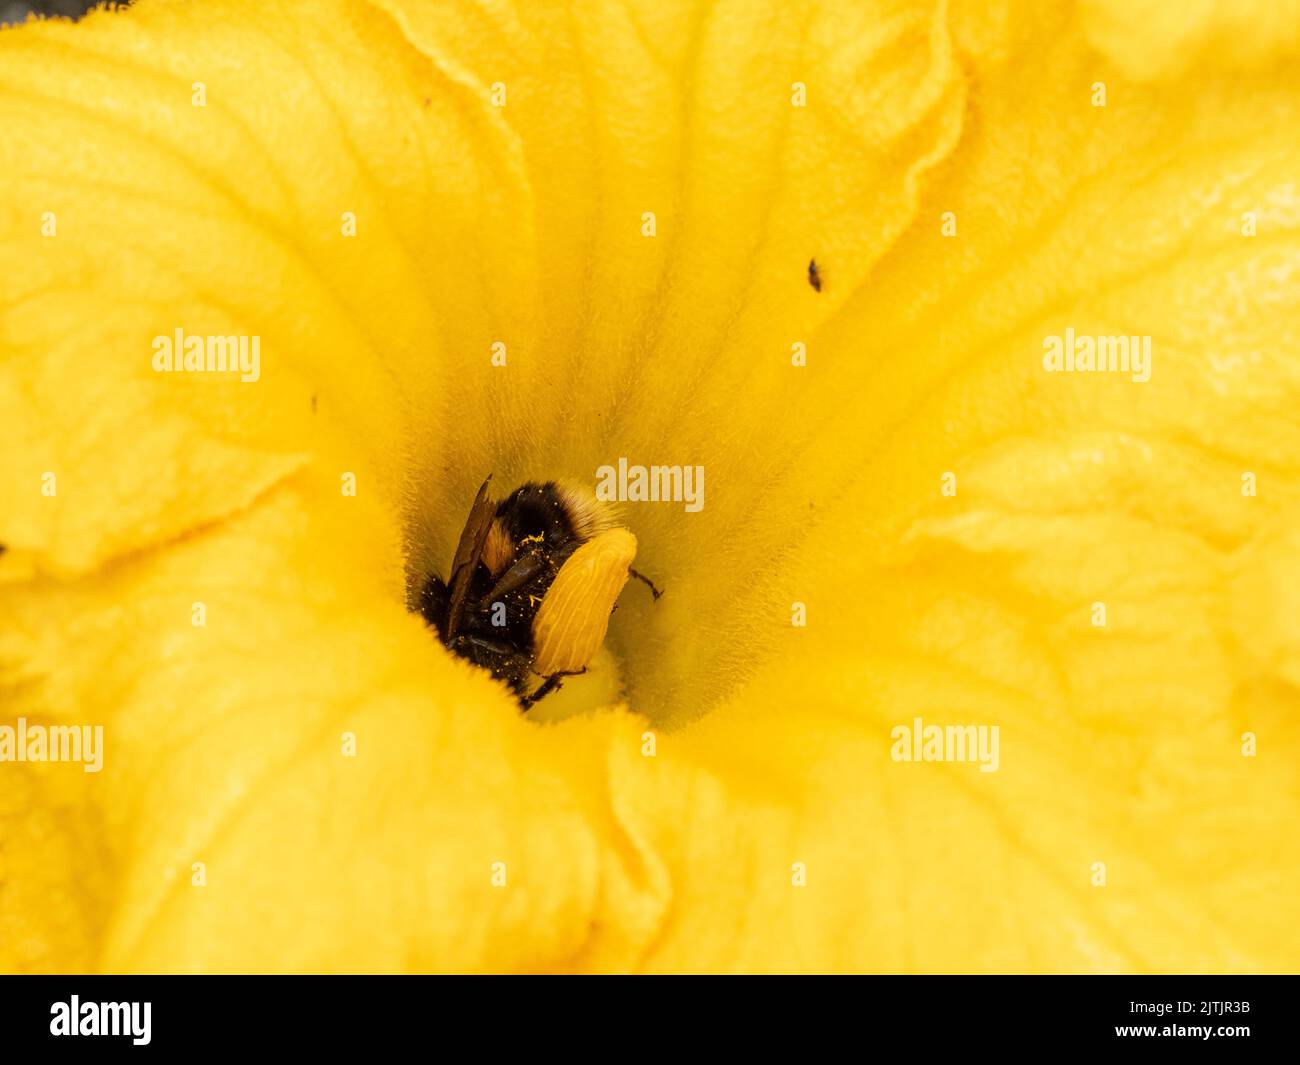 A close up of a bumble bee collecting nectar from a bright yellow courgette plant Stock Photo